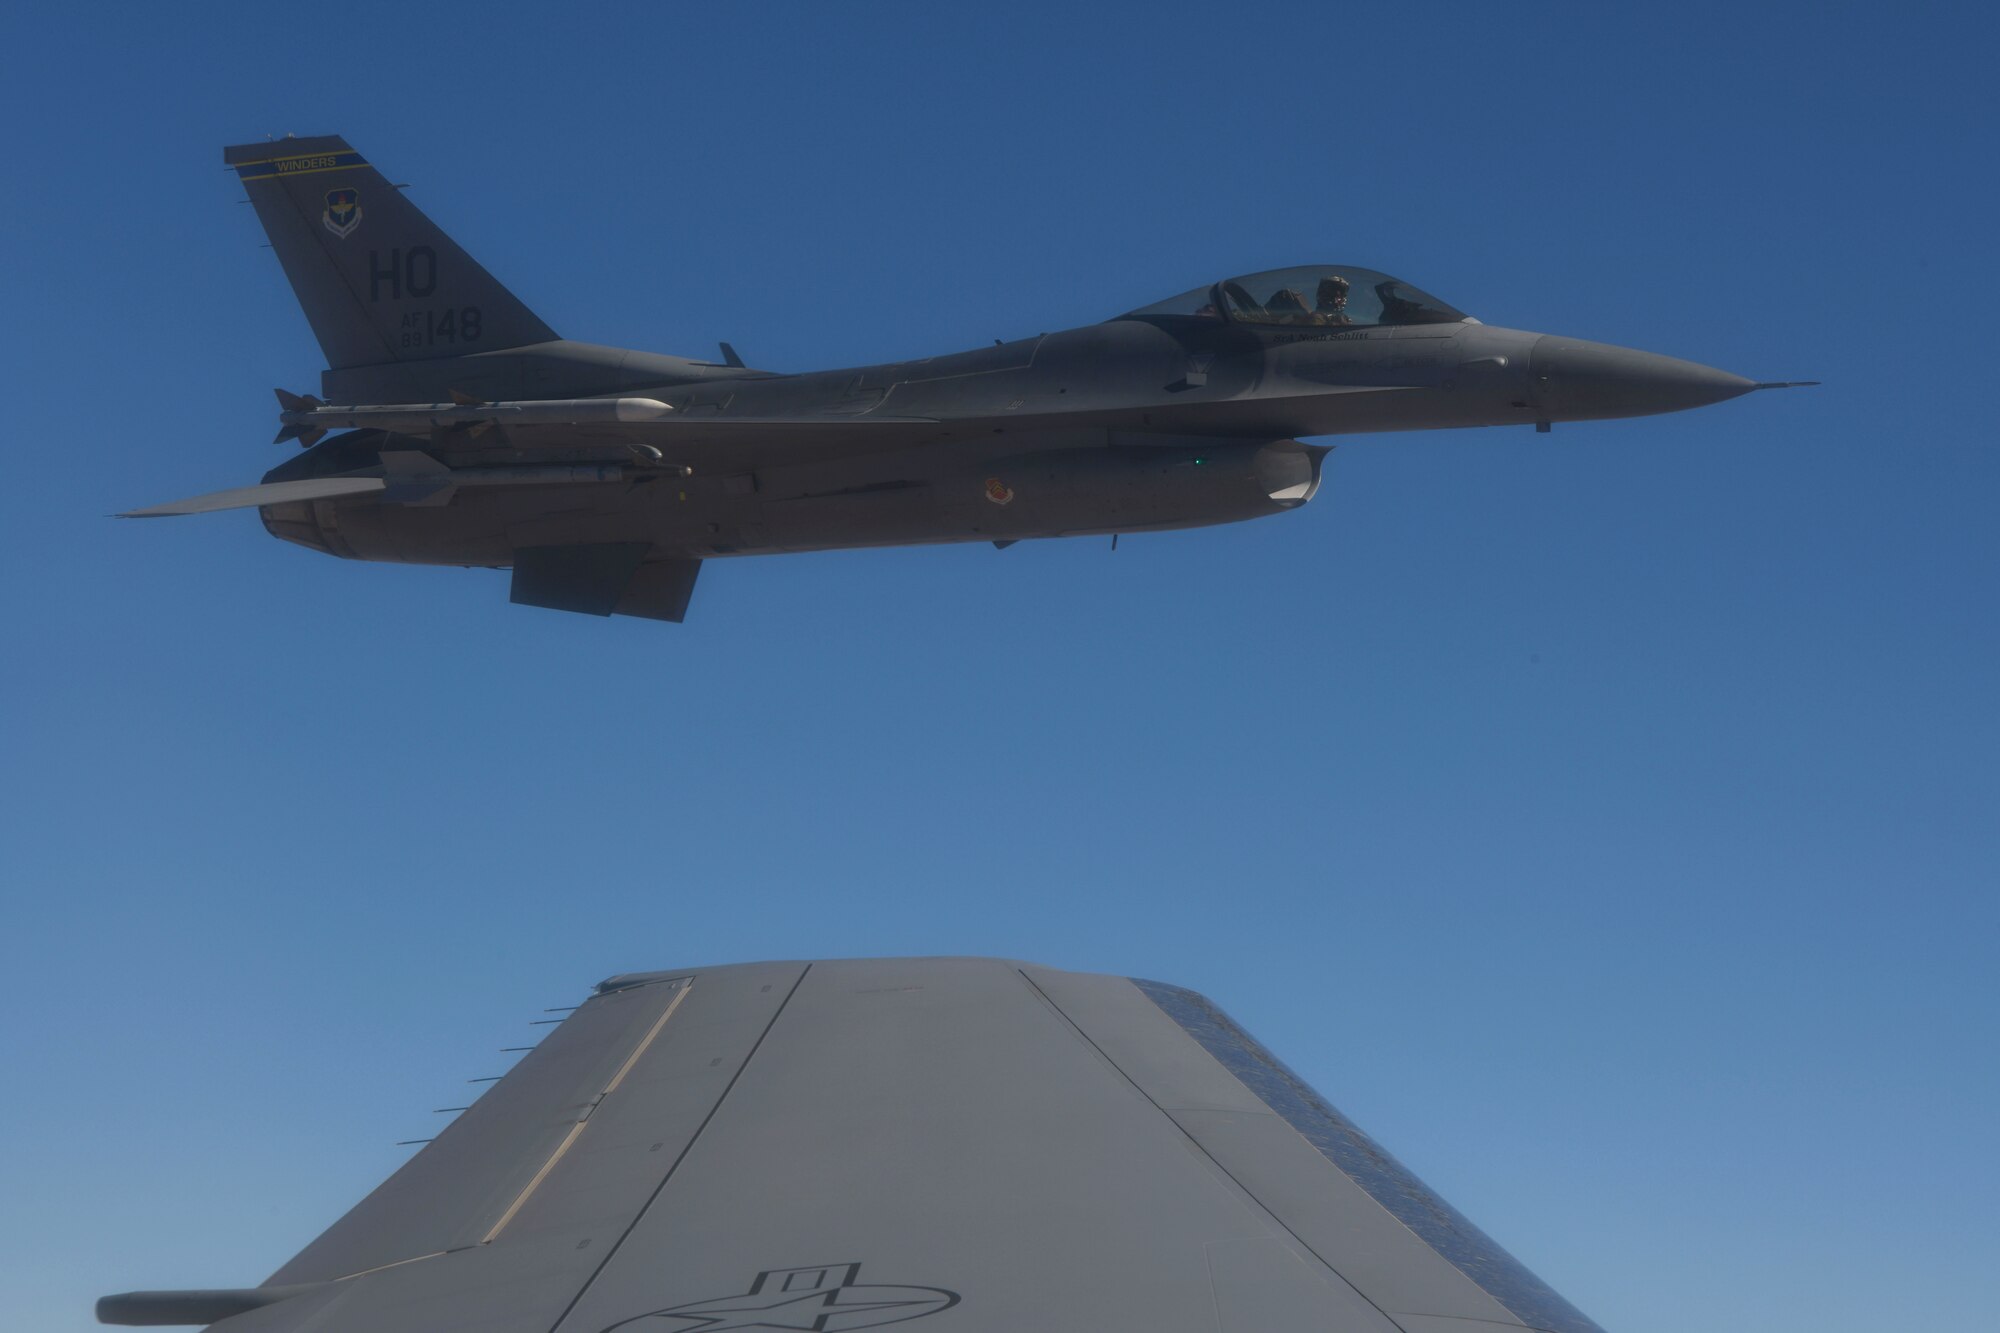 An F-16 Fighting Falcon from the 49th Wing at Holloman Air Force Base (AFB), New Mexico, flies off the left wing of a KC-46 Pegasus from the 56th Air Refueling Squadron at Altus AFB, Oklahoma, December 7, 2020. A two-ship KC-46 refueler formation flew in a racetrack pattern over southern New Mexico while refueling ten F-16s from Holloman AFB. (U.S. Air Force photo by Tech. Sgt. Robert Sizelove)